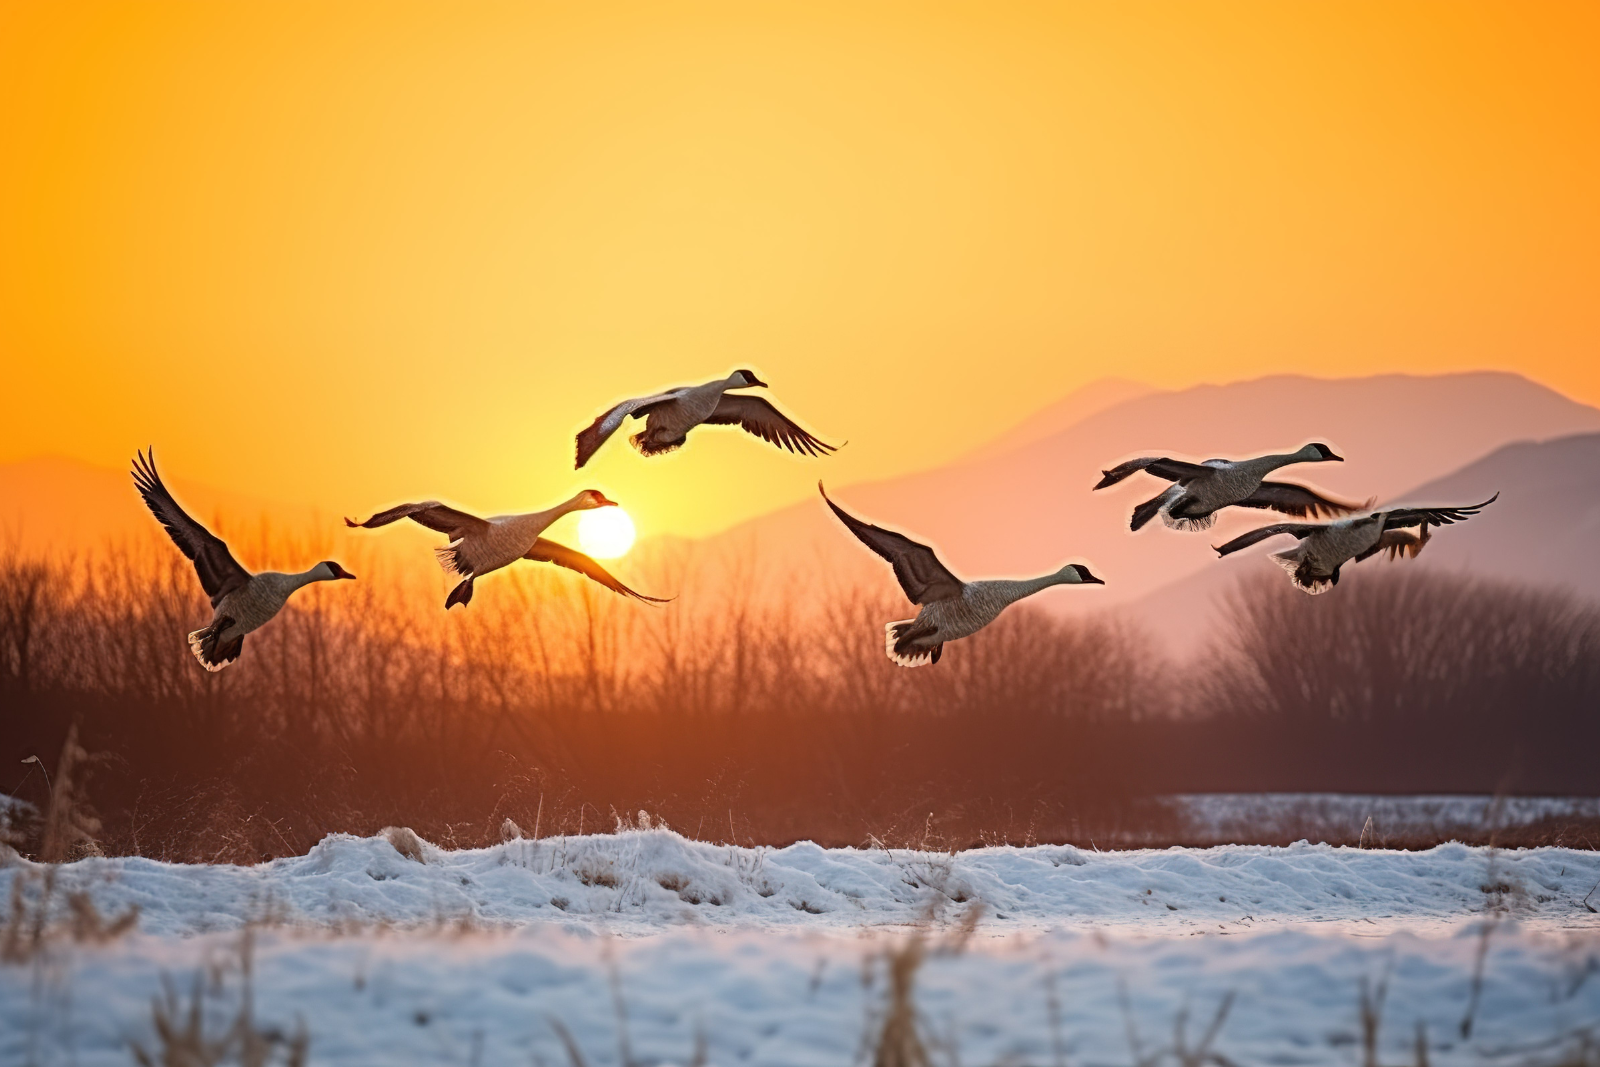 Geese flying across a snowy field at sunset. Image by pngtree.com